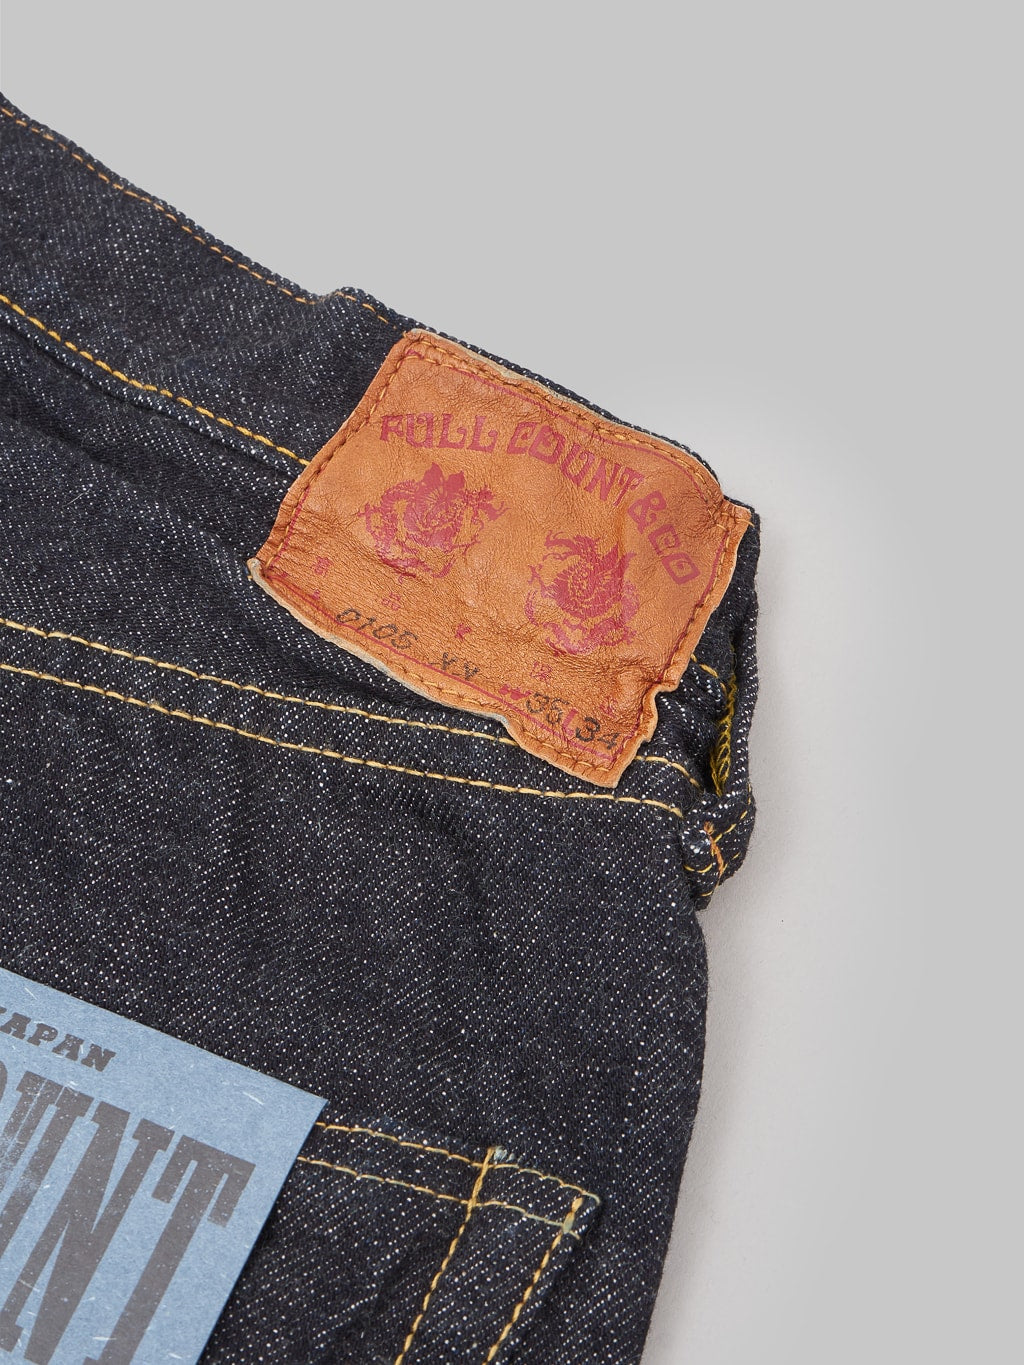 Fullcount 0105XW Wide Straight selvedge Jeans leather patch